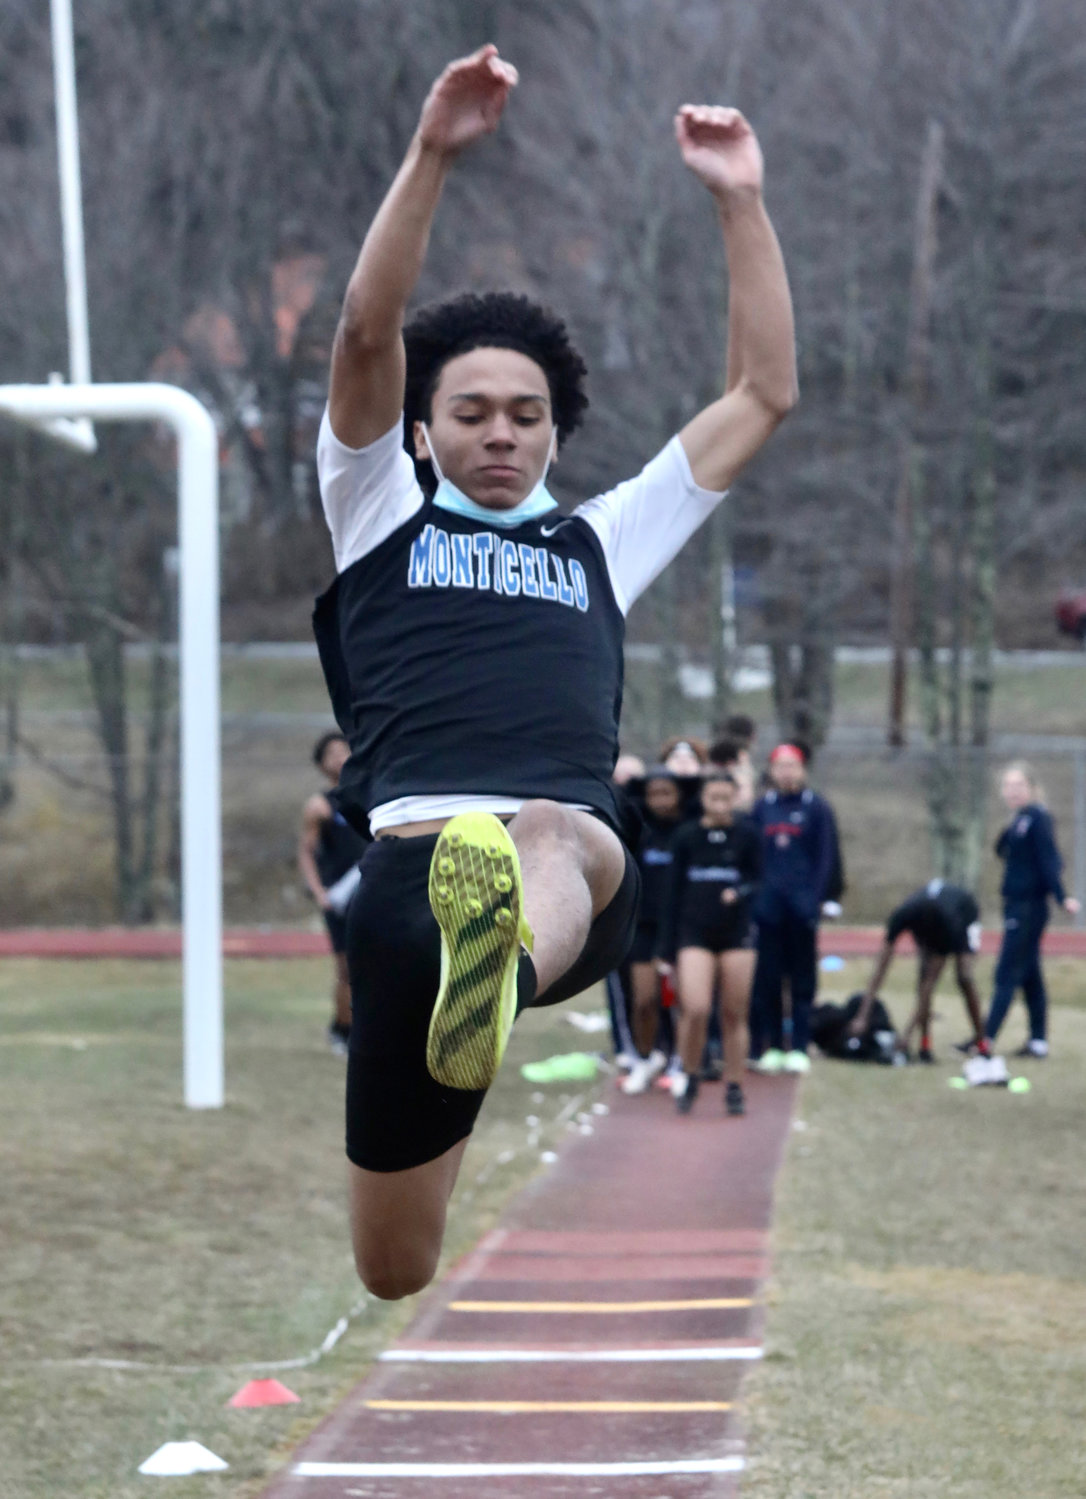 Monticello’s premiere jumper Jadden Bryant captured first in the long jump (pictured), the high jump and the triple jump. The Montis swept all three events.